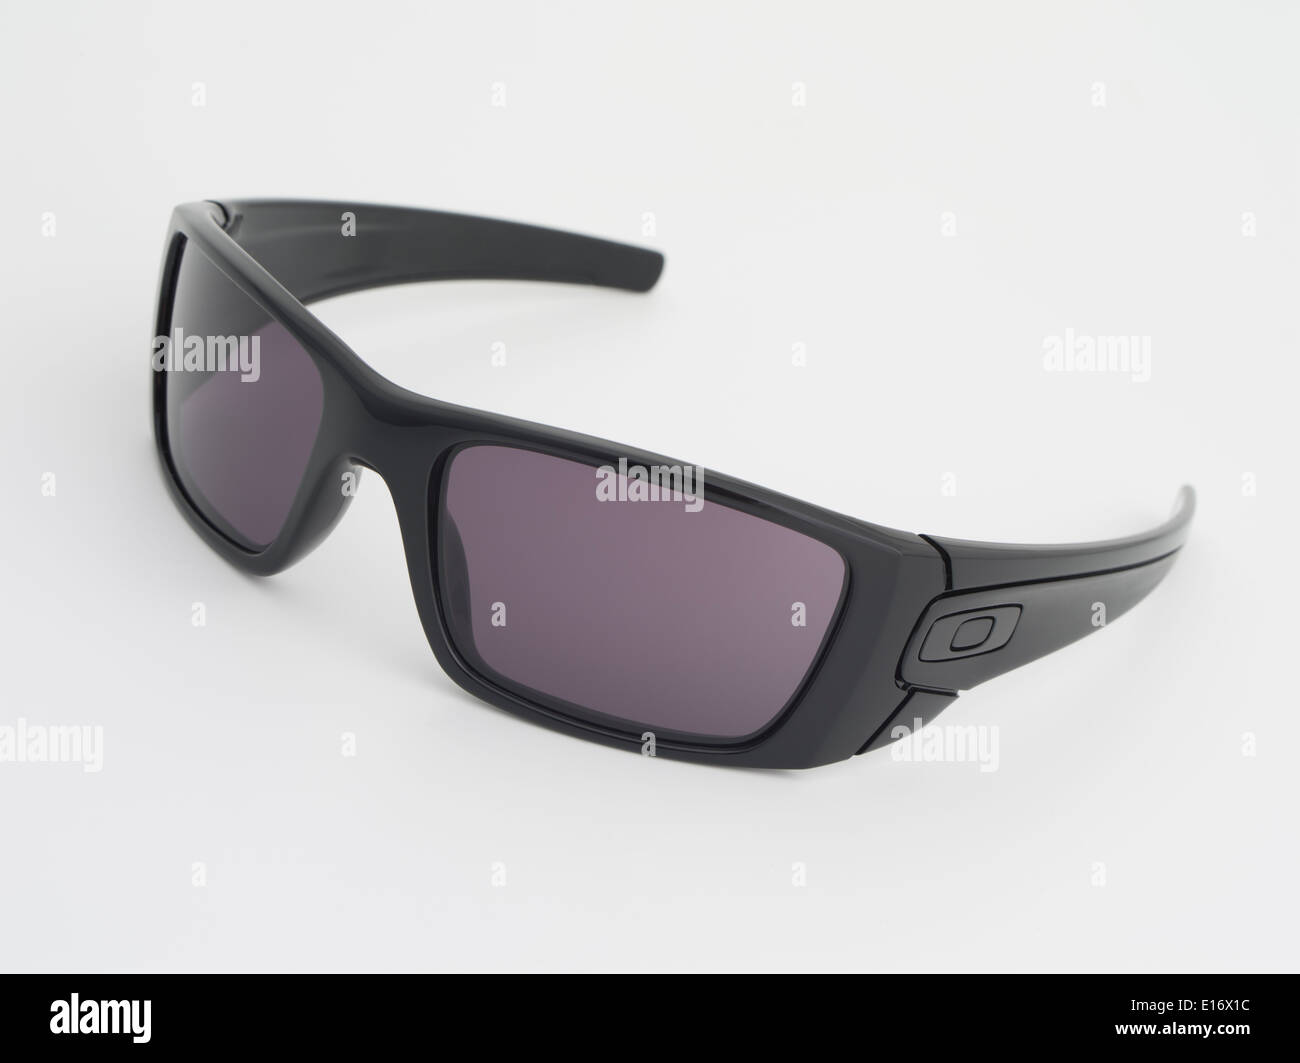 Oakley Fuel Cell Polished Black Sunglasses with warm grey lenses. Oakley  inc based in Foothill Ranch, California Stock Photo - Alamy